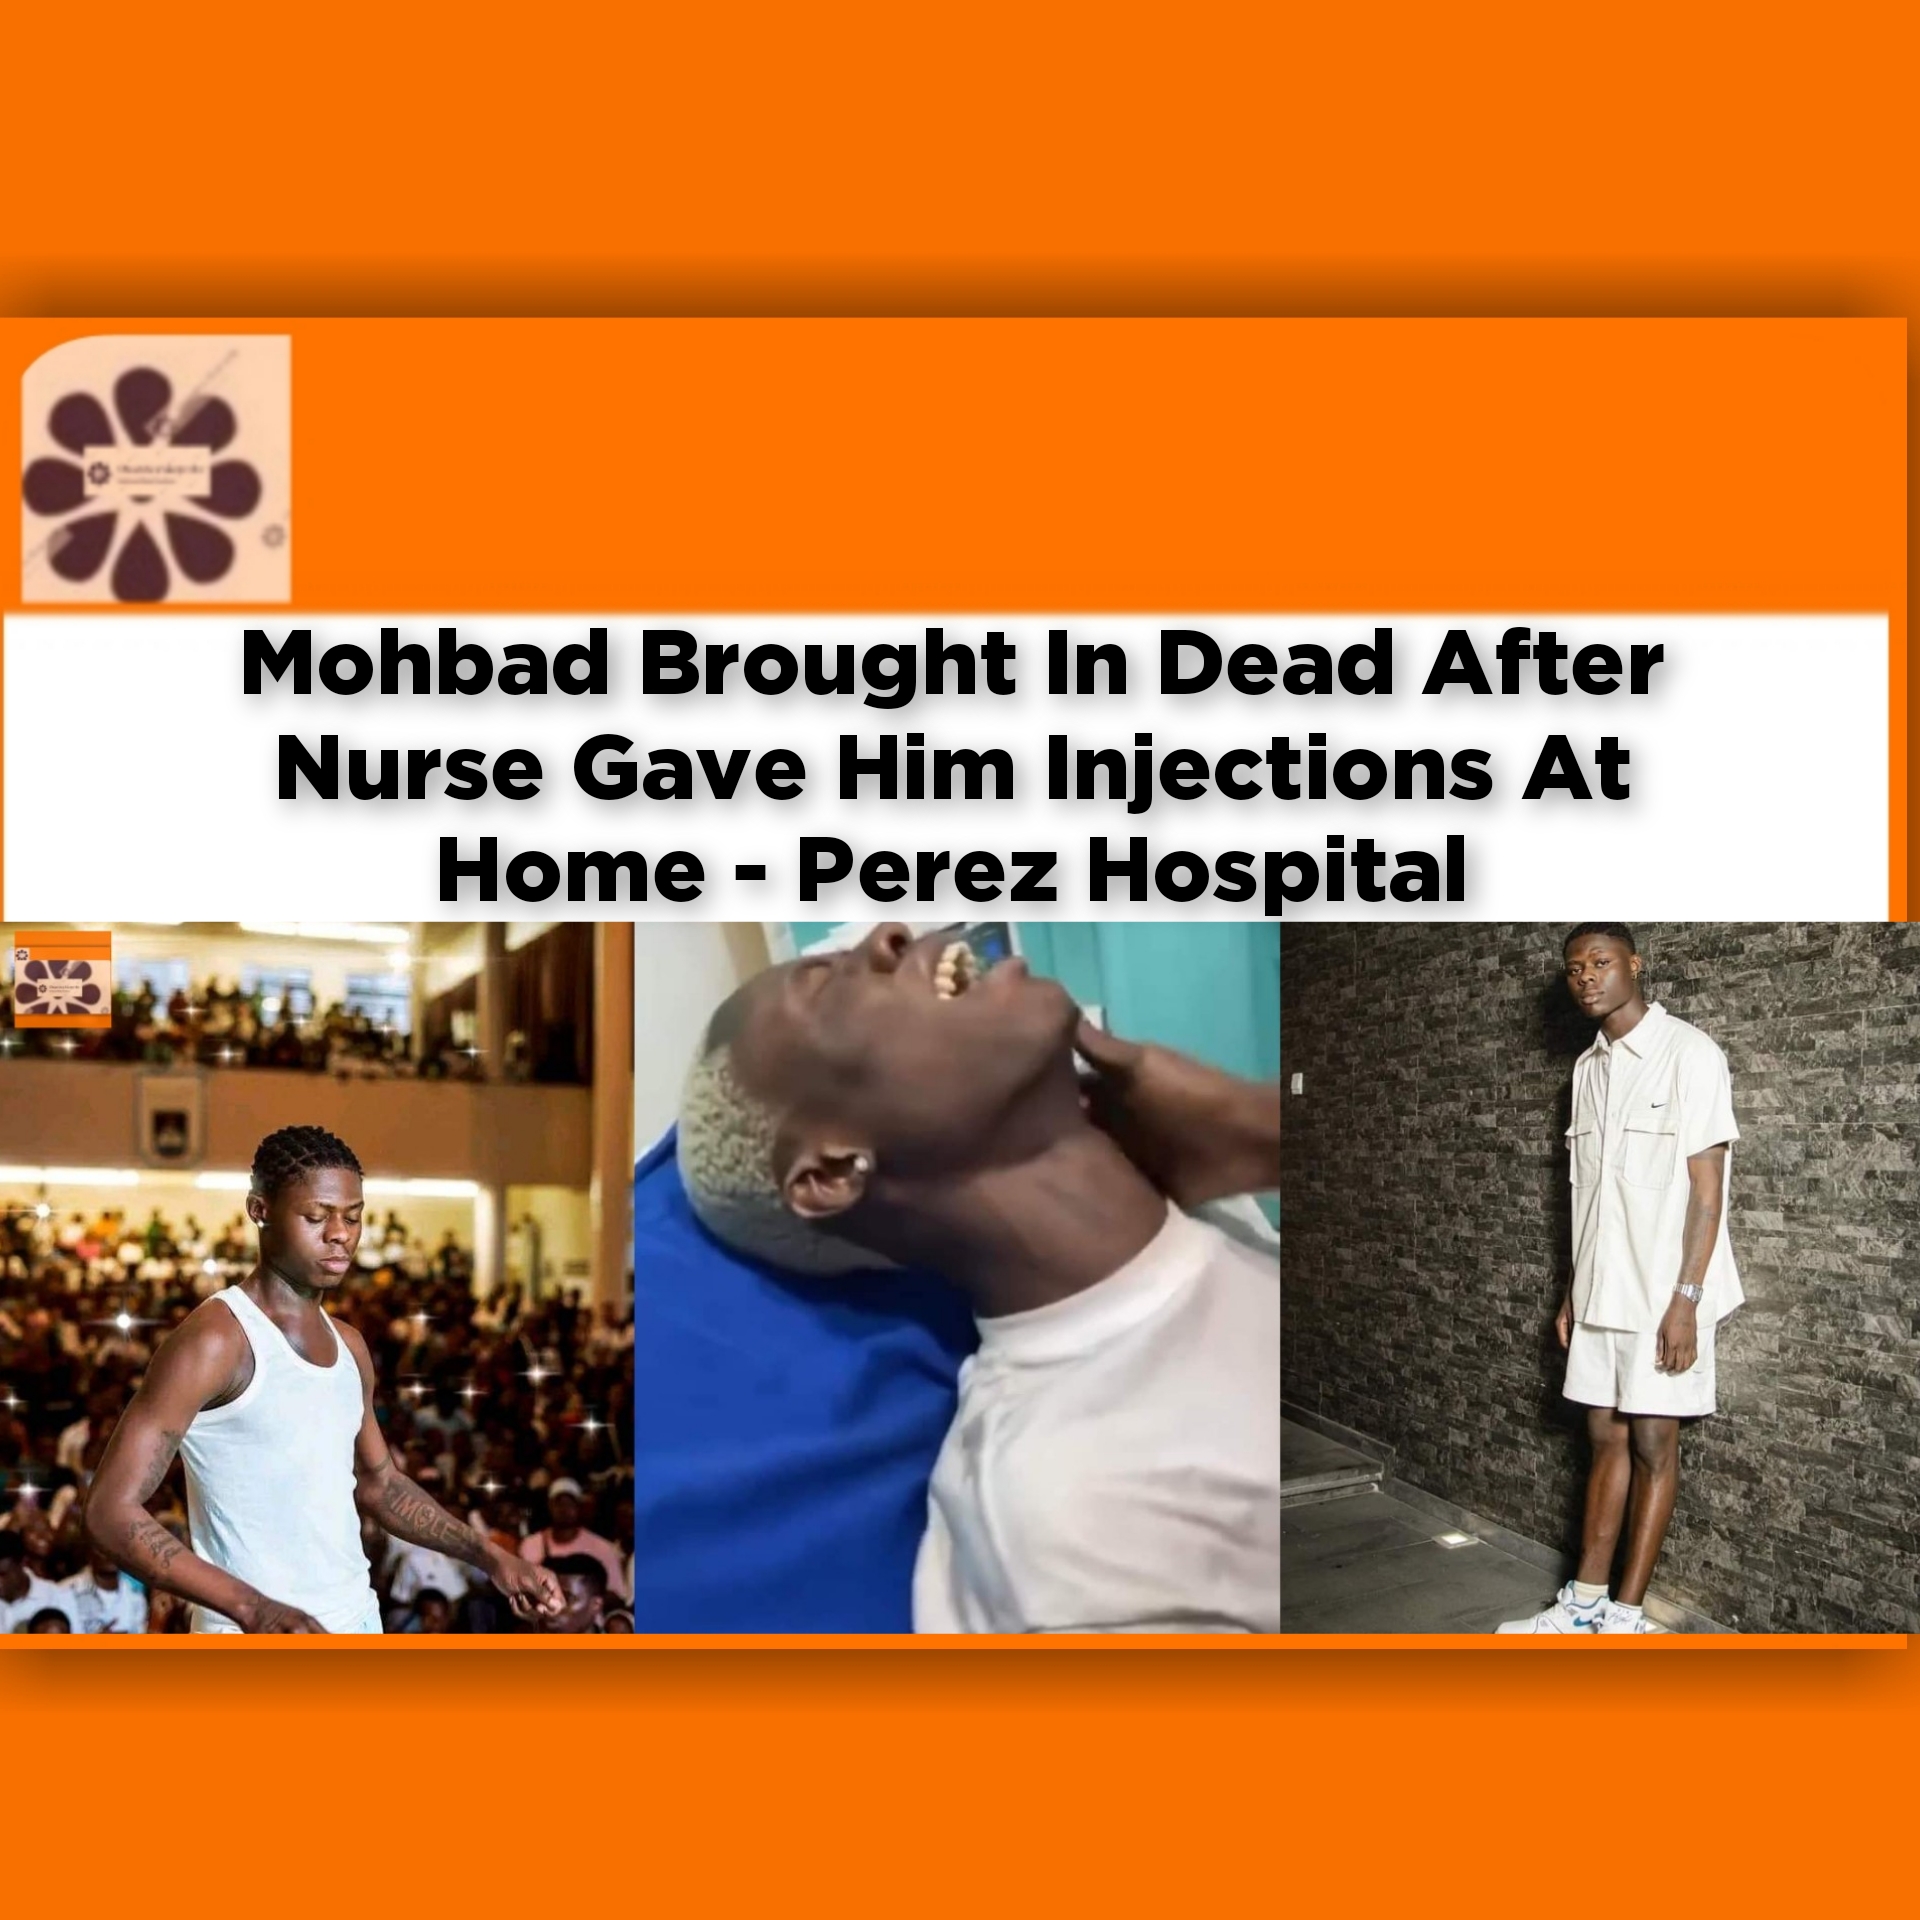 Mohbad Brought In Dead After Nurse Gave Him Injections At Home - Perez Hospital ~ OsazuwaAkonedo #Lagos #Mohbad #Perez Team,OsazuwaAkonedo,Editorial Policy